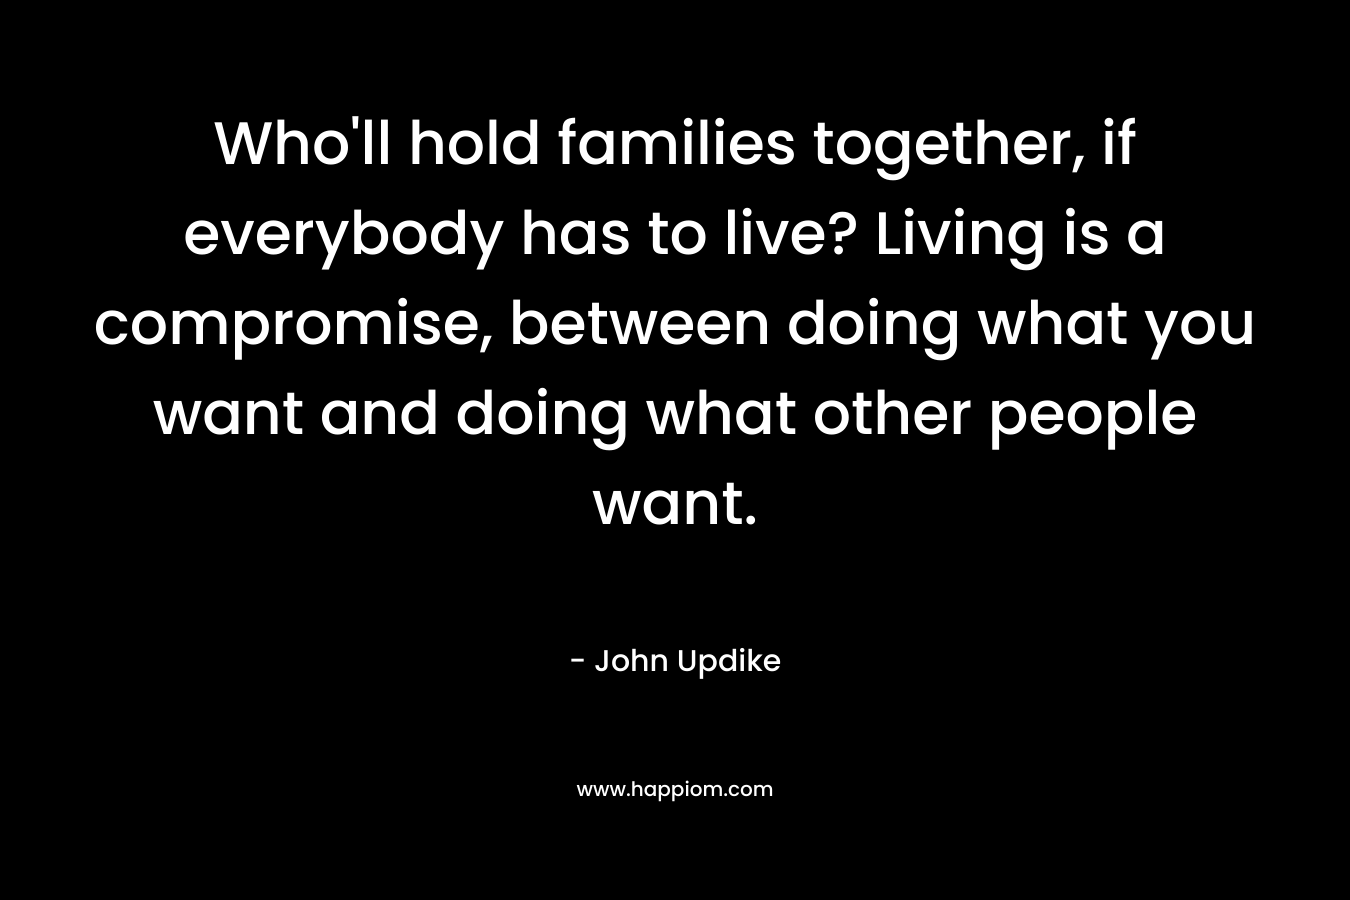 Who'll hold families together, if everybody has to live? Living is a compromise, between doing what you want and doing what other people want.